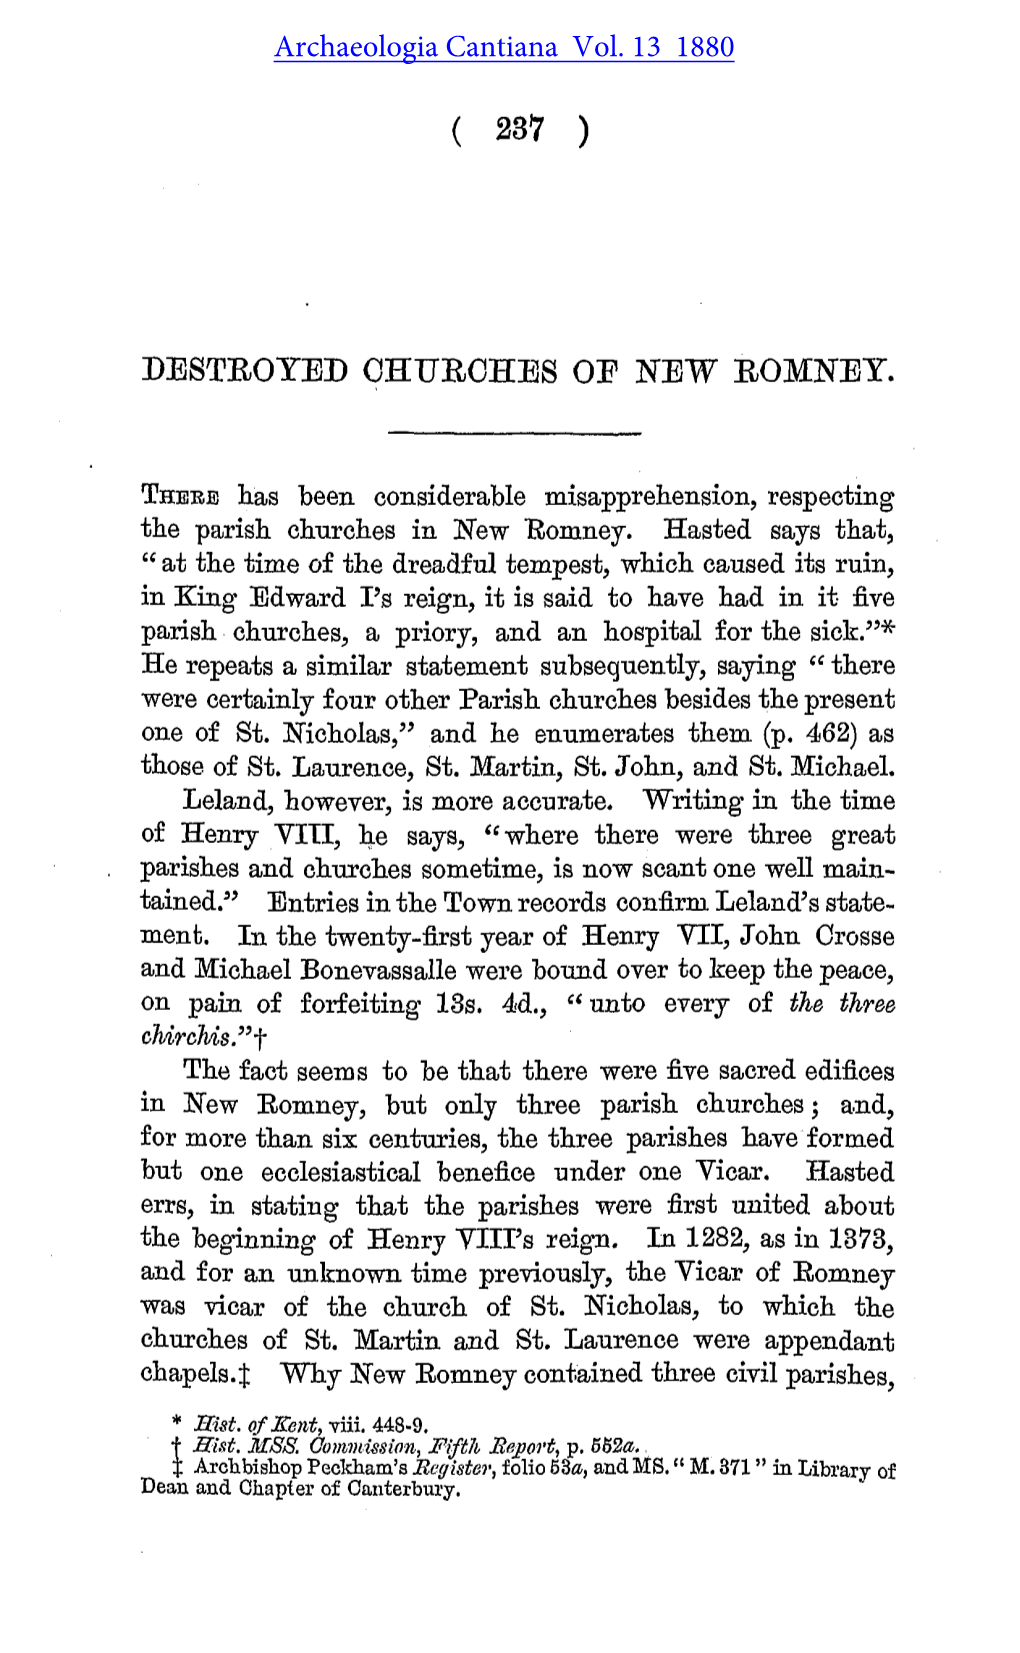 Destroyed Churches of New Romney